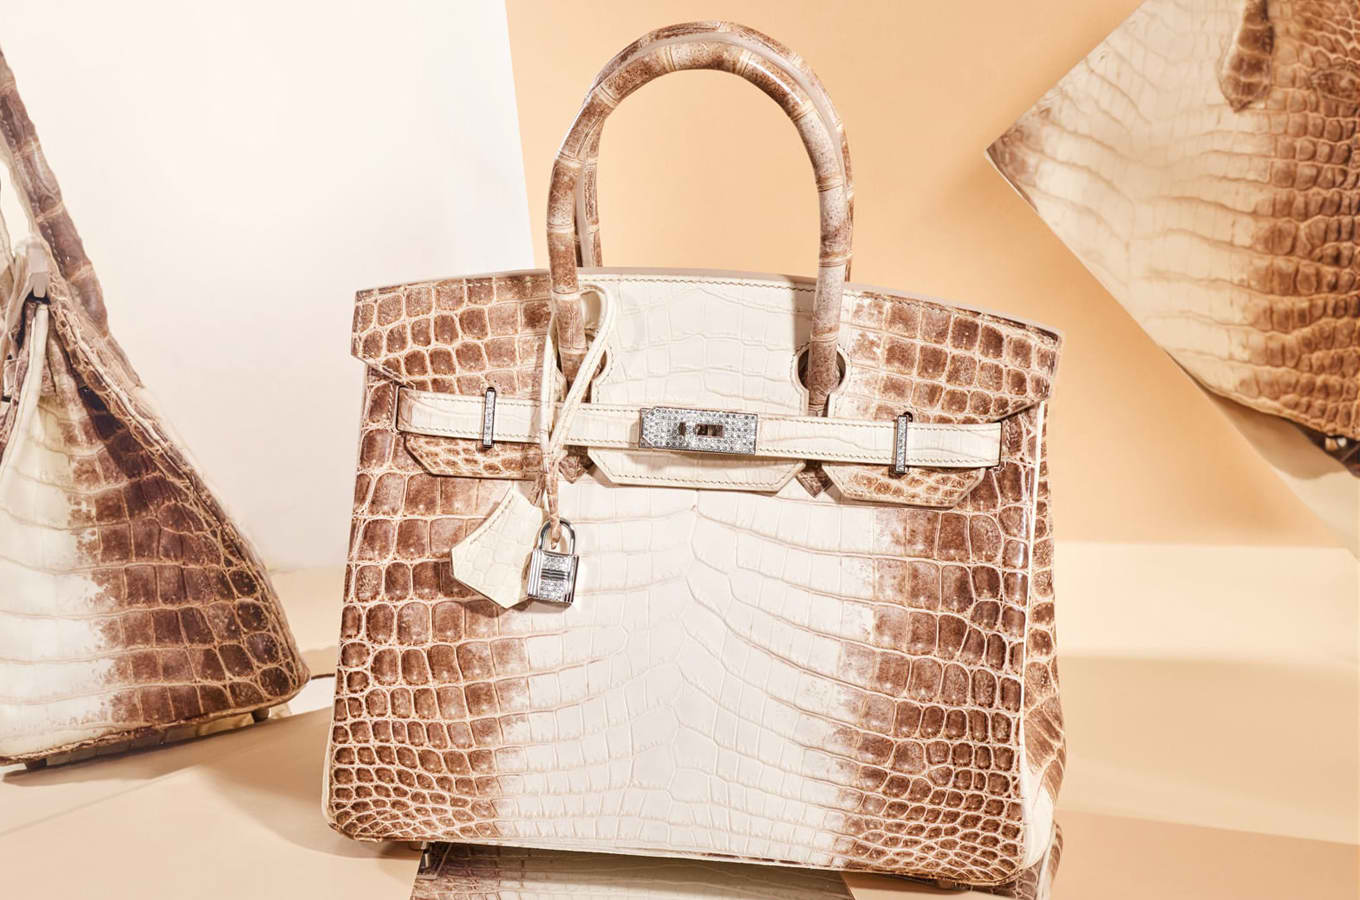 The Top 5 Most Expensive Hermes Birkin Bags In The World - CLOSS FASHION